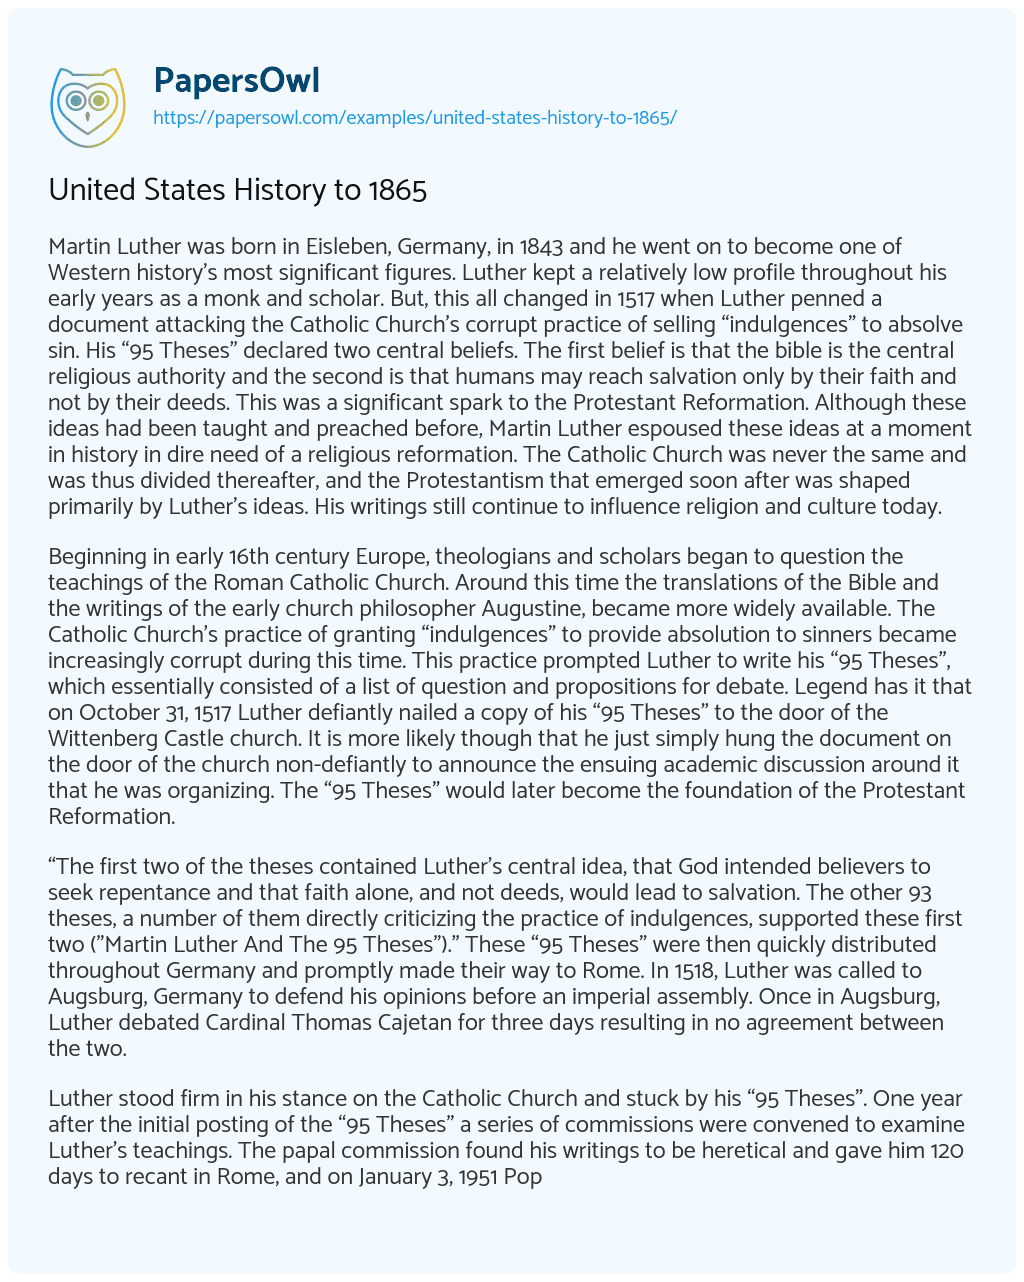 Essay on United States History to 1865